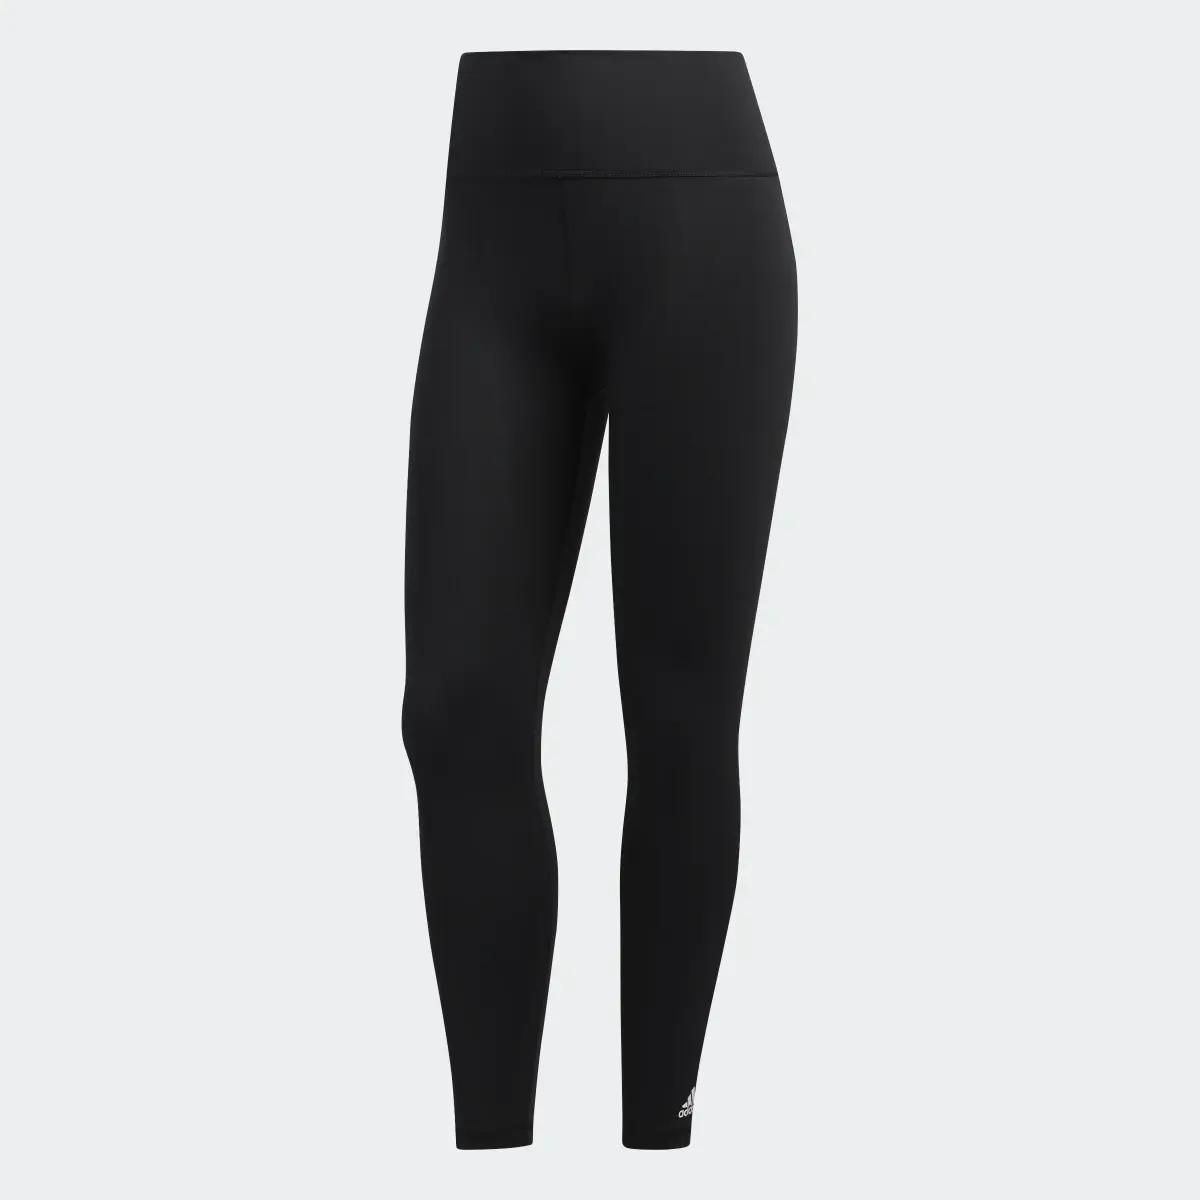 Adidas Believe This 2.0 7/8 Tights. 1